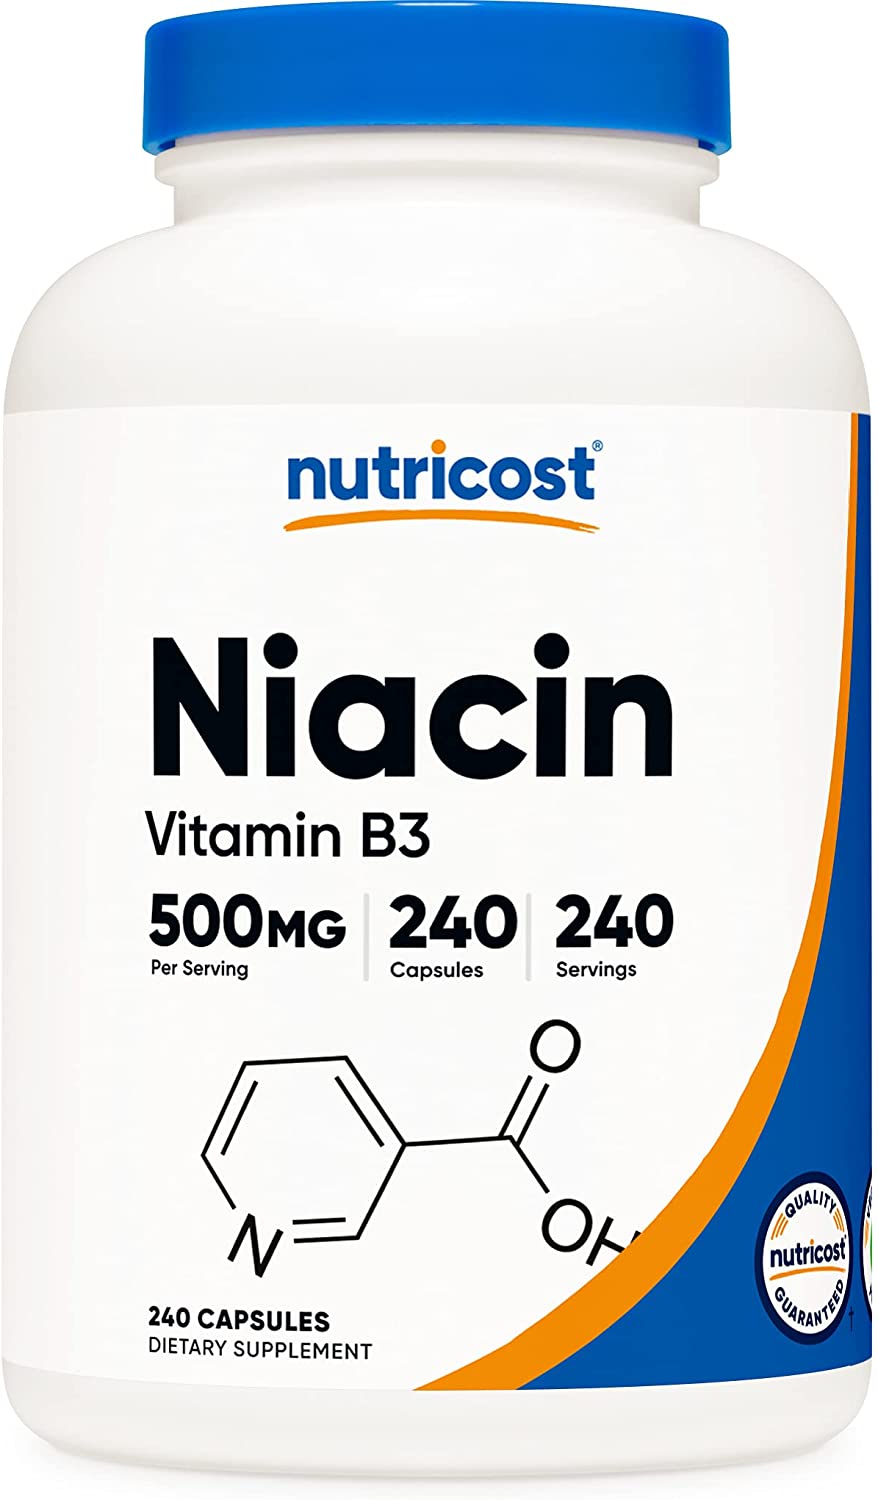 What is the best time of day to take niacin?